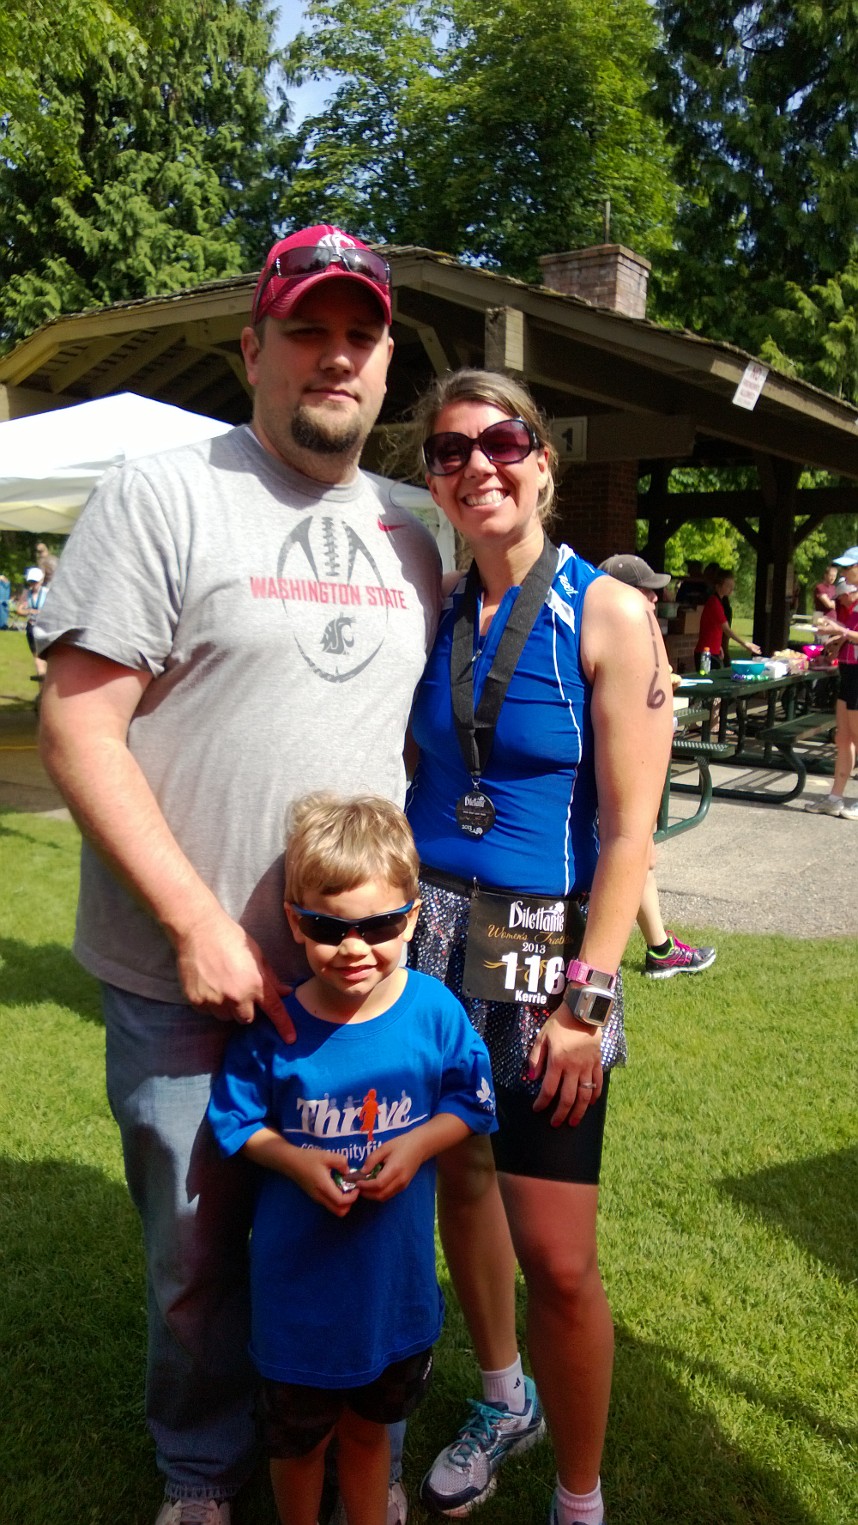 Officially a triathlete. I'm hooked. Had to leave before results were up. Doesn't really matter; had a blast.